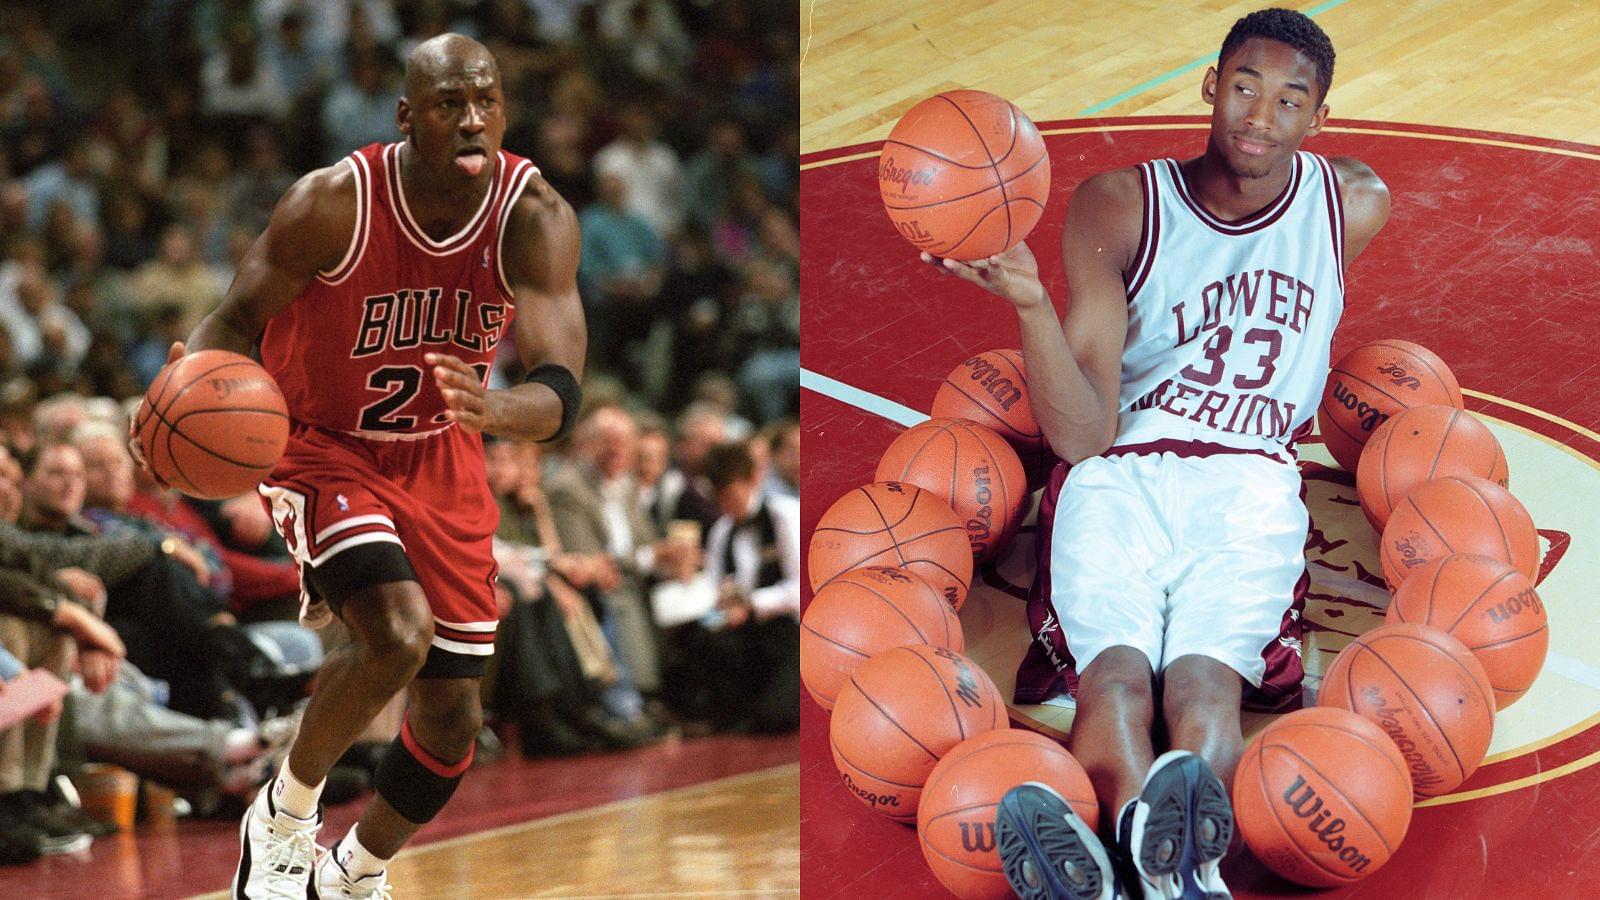 “Black who? Imma Call Him Michael Jordan, That's His F*****g Name”: 17-year-old Kobe Bryant Wasn’t Ready to Call Mike The ‘Black Jesus’